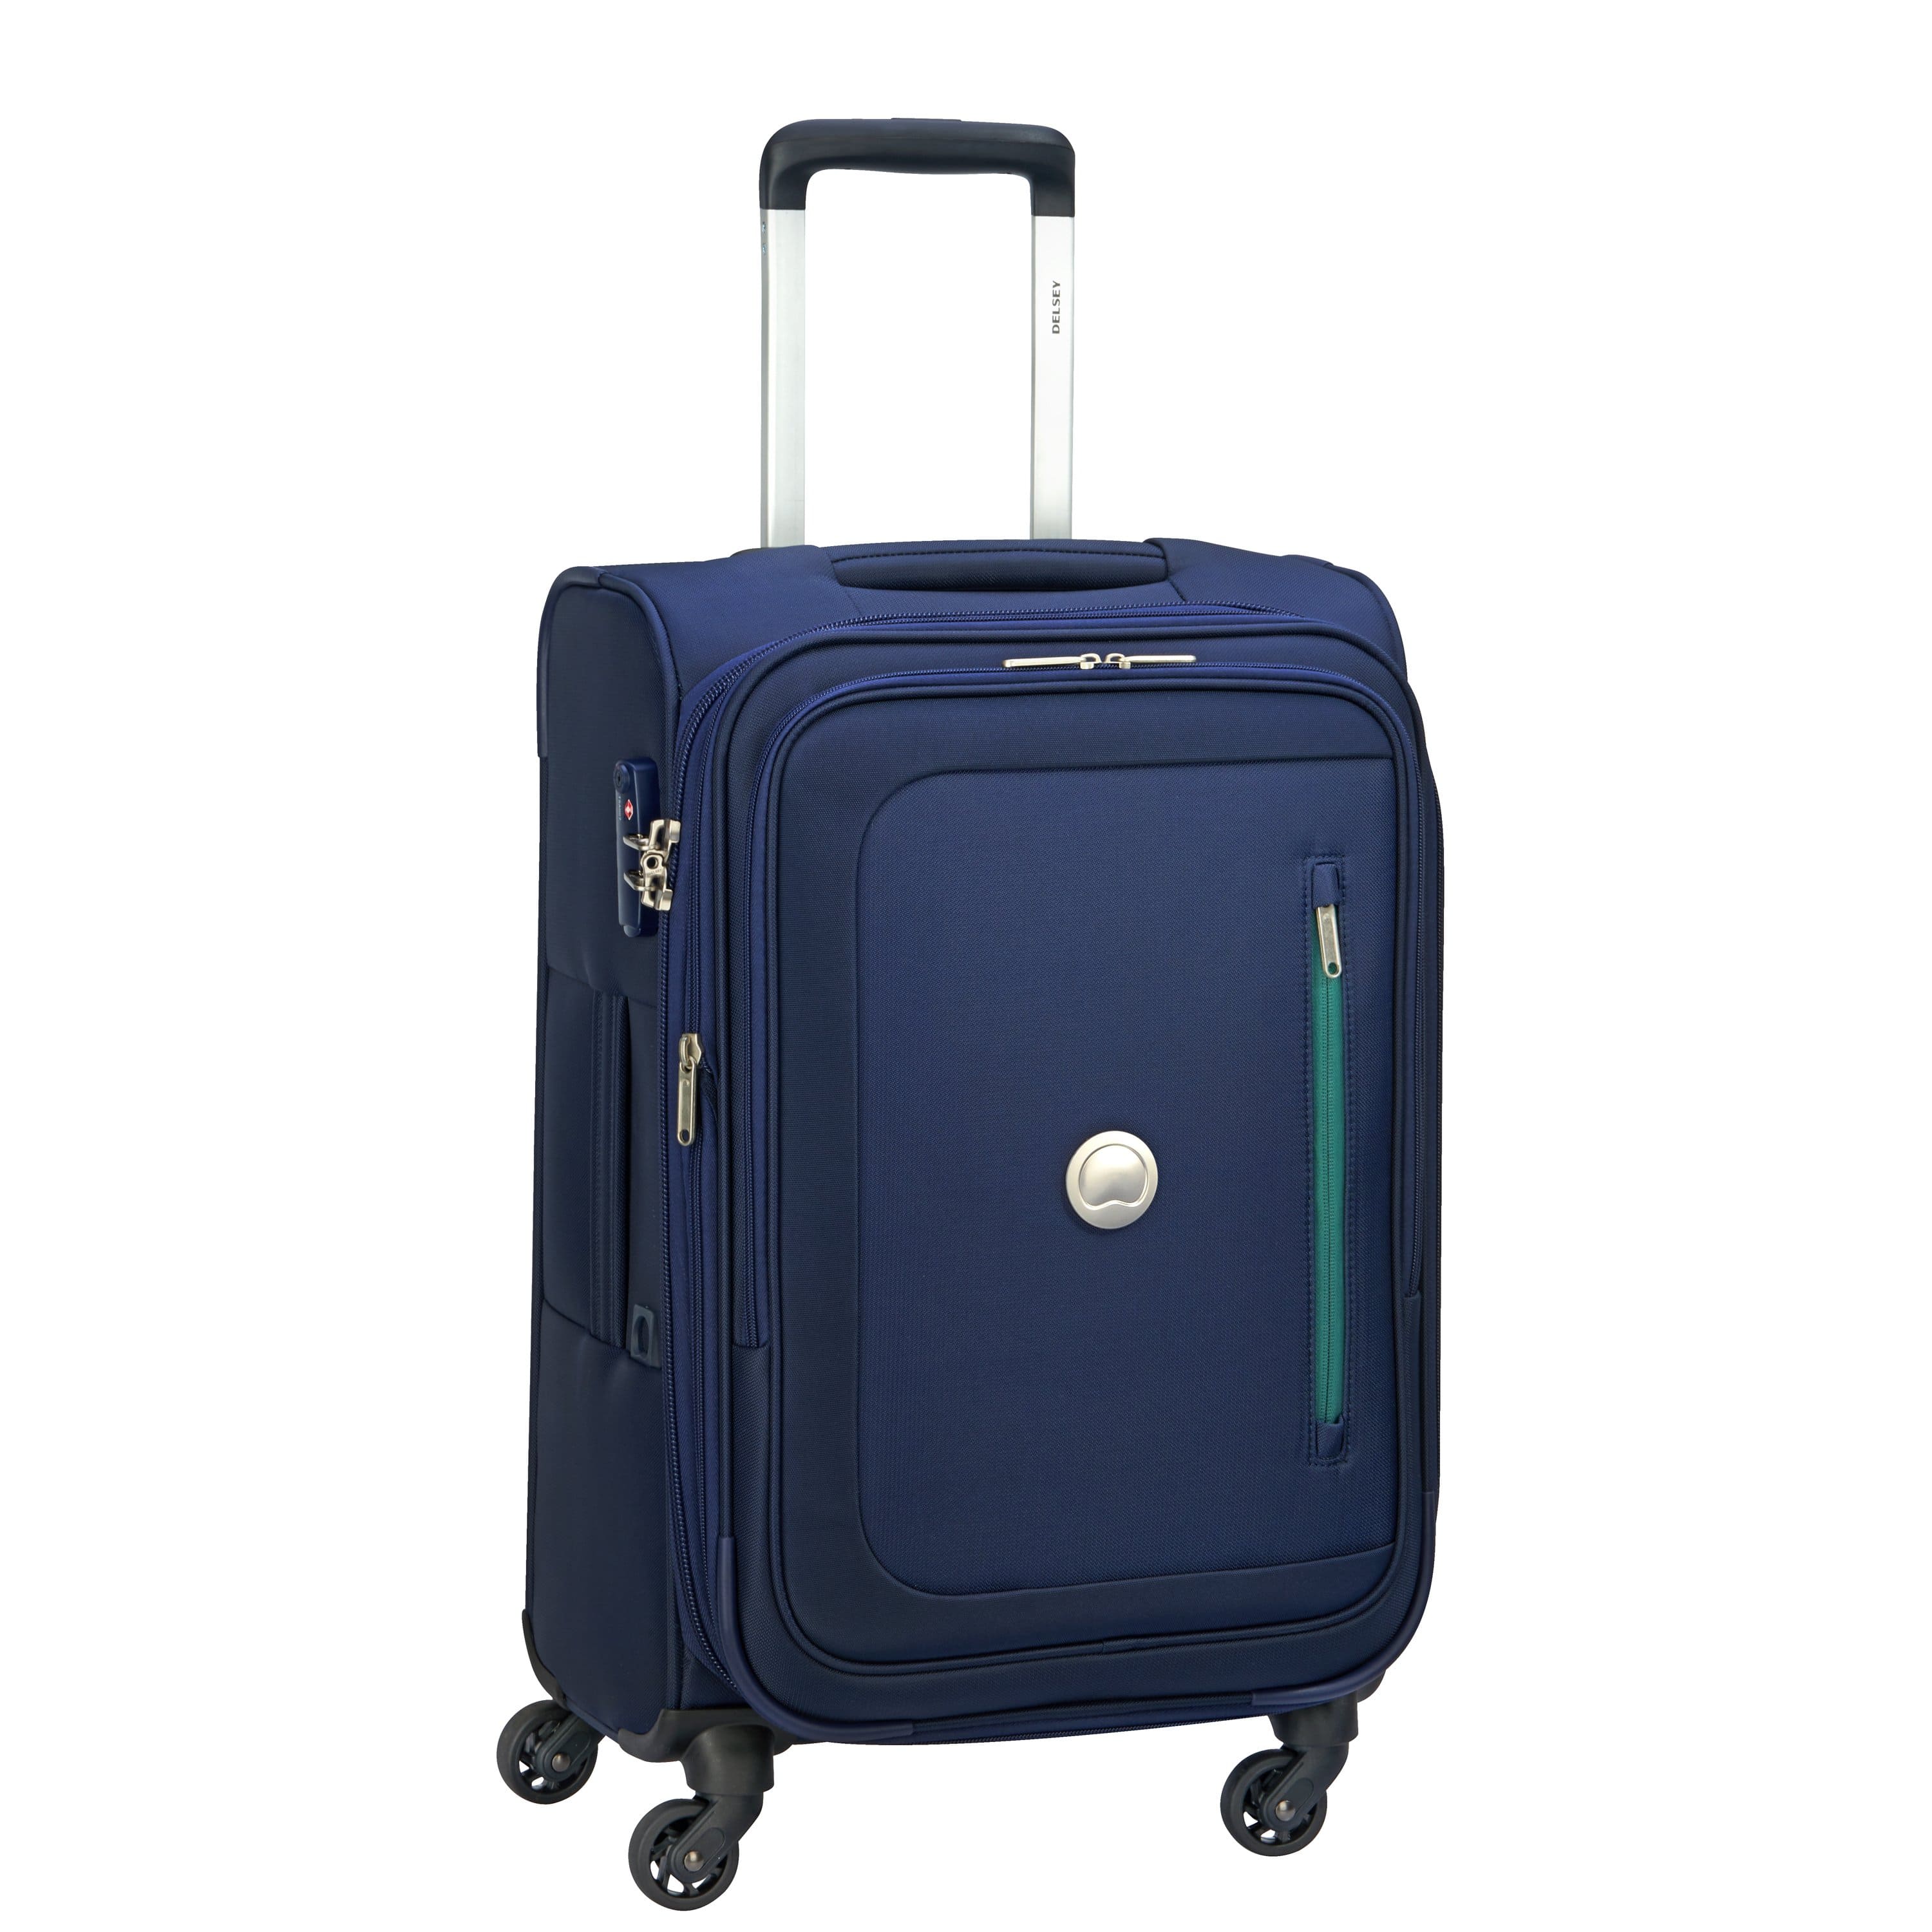 DELSEY OURAL 4W CABIN 61CM TR NAVY BLUE 00352880502 E9 NAVY BLUE